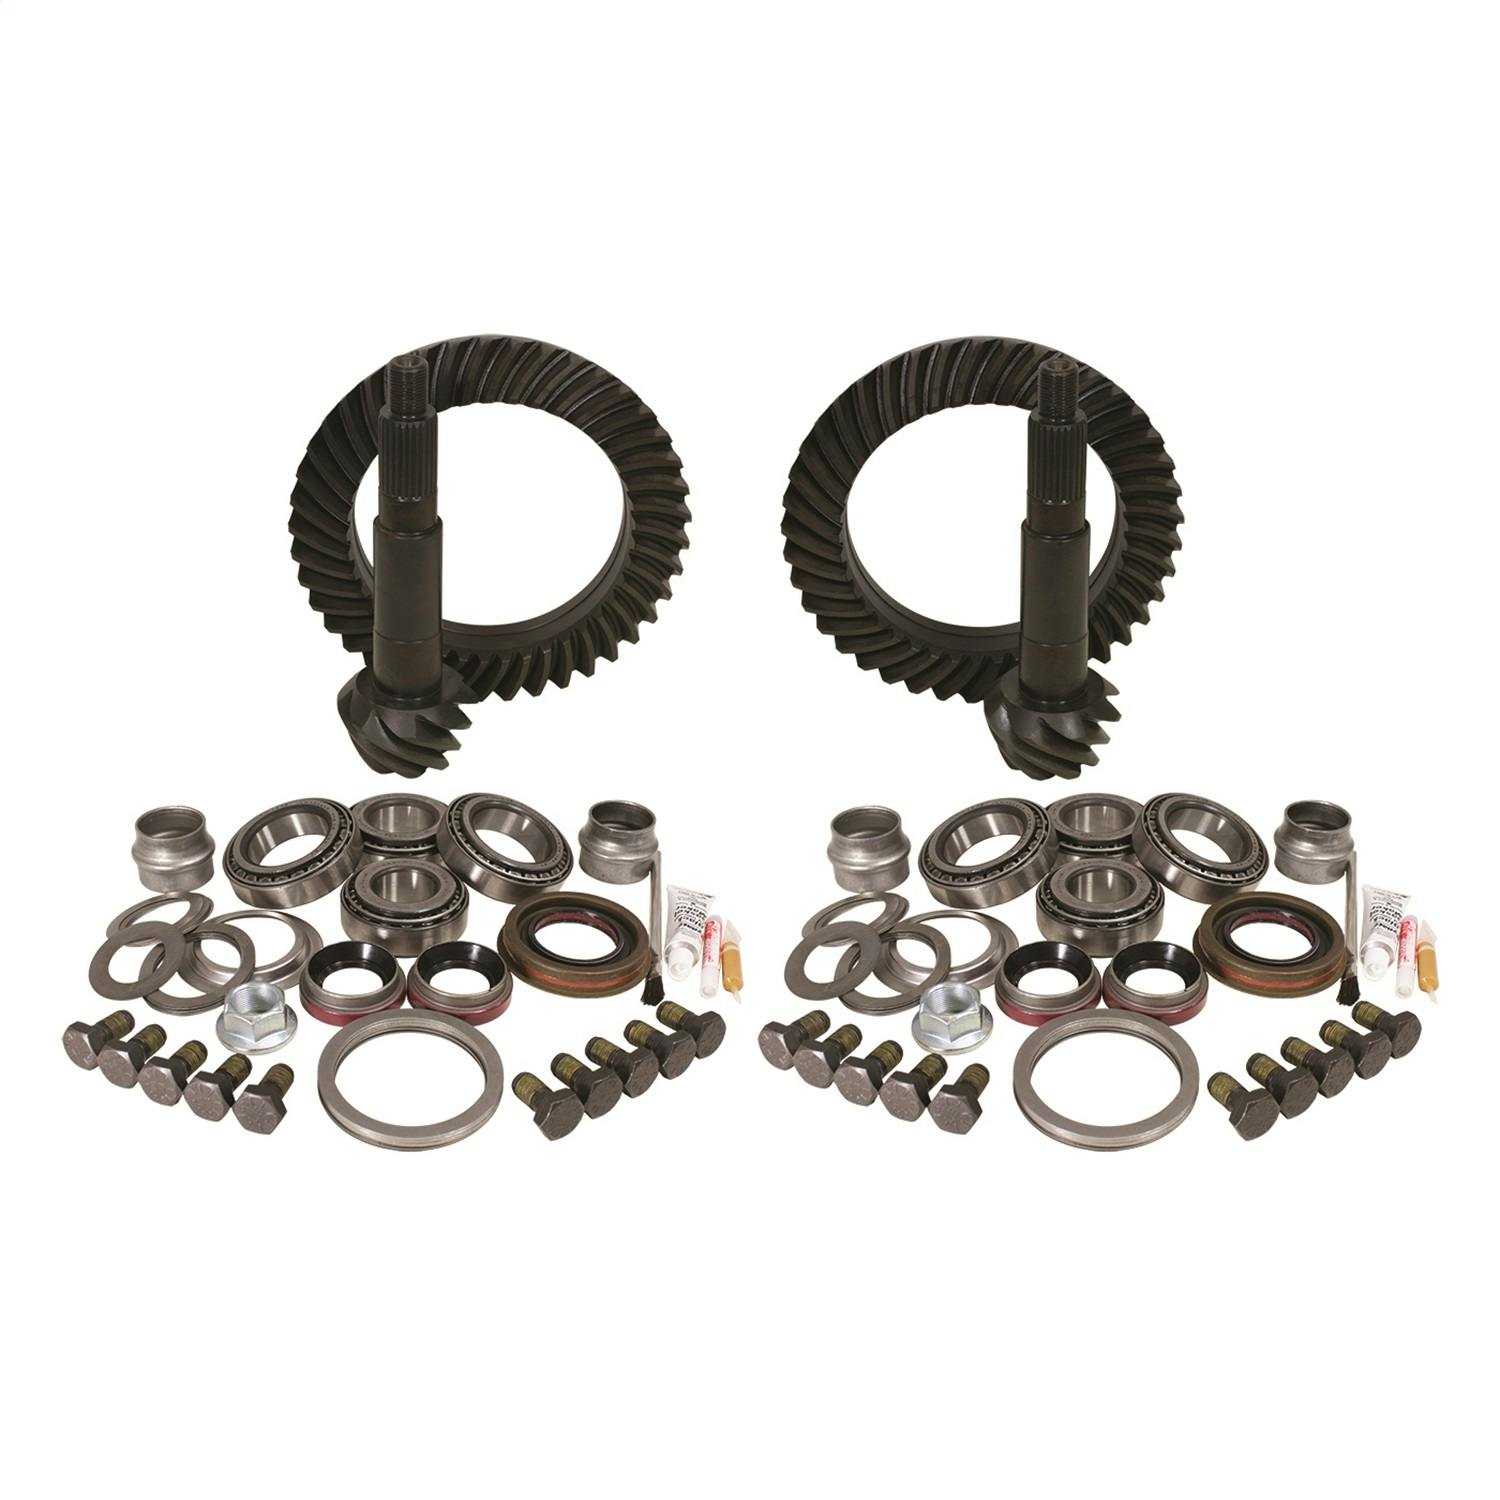 USA Standard Gear ZGK016 Ring And Pinion Set And Complete Install Kit